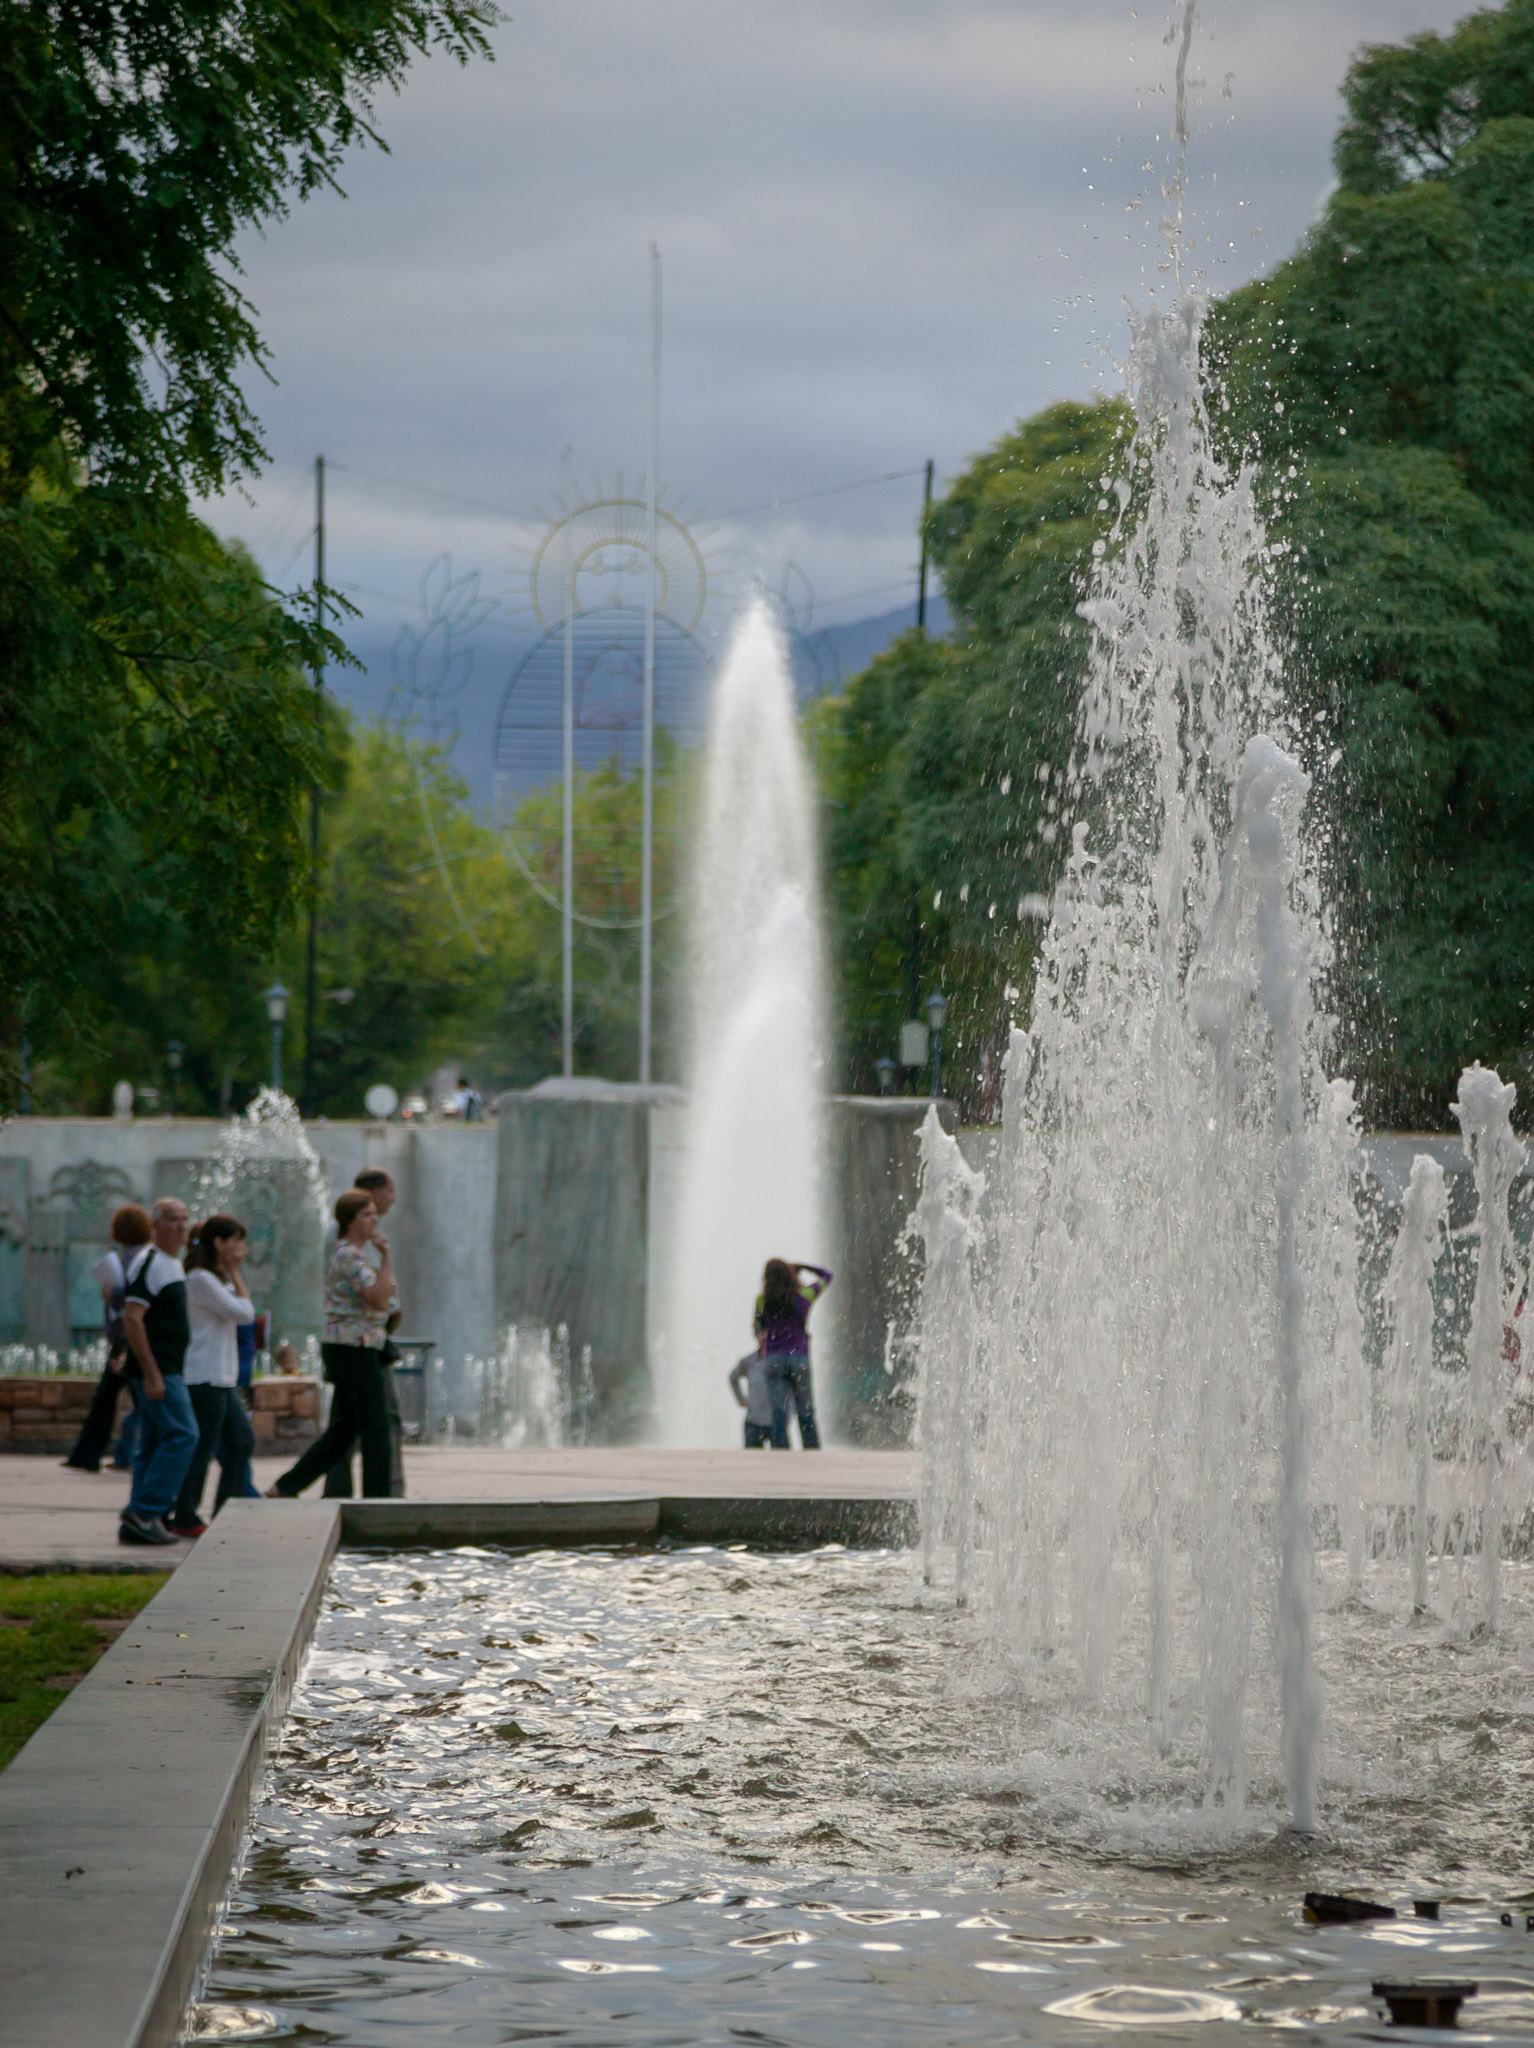 Downtown Mendoza, full of parks and water